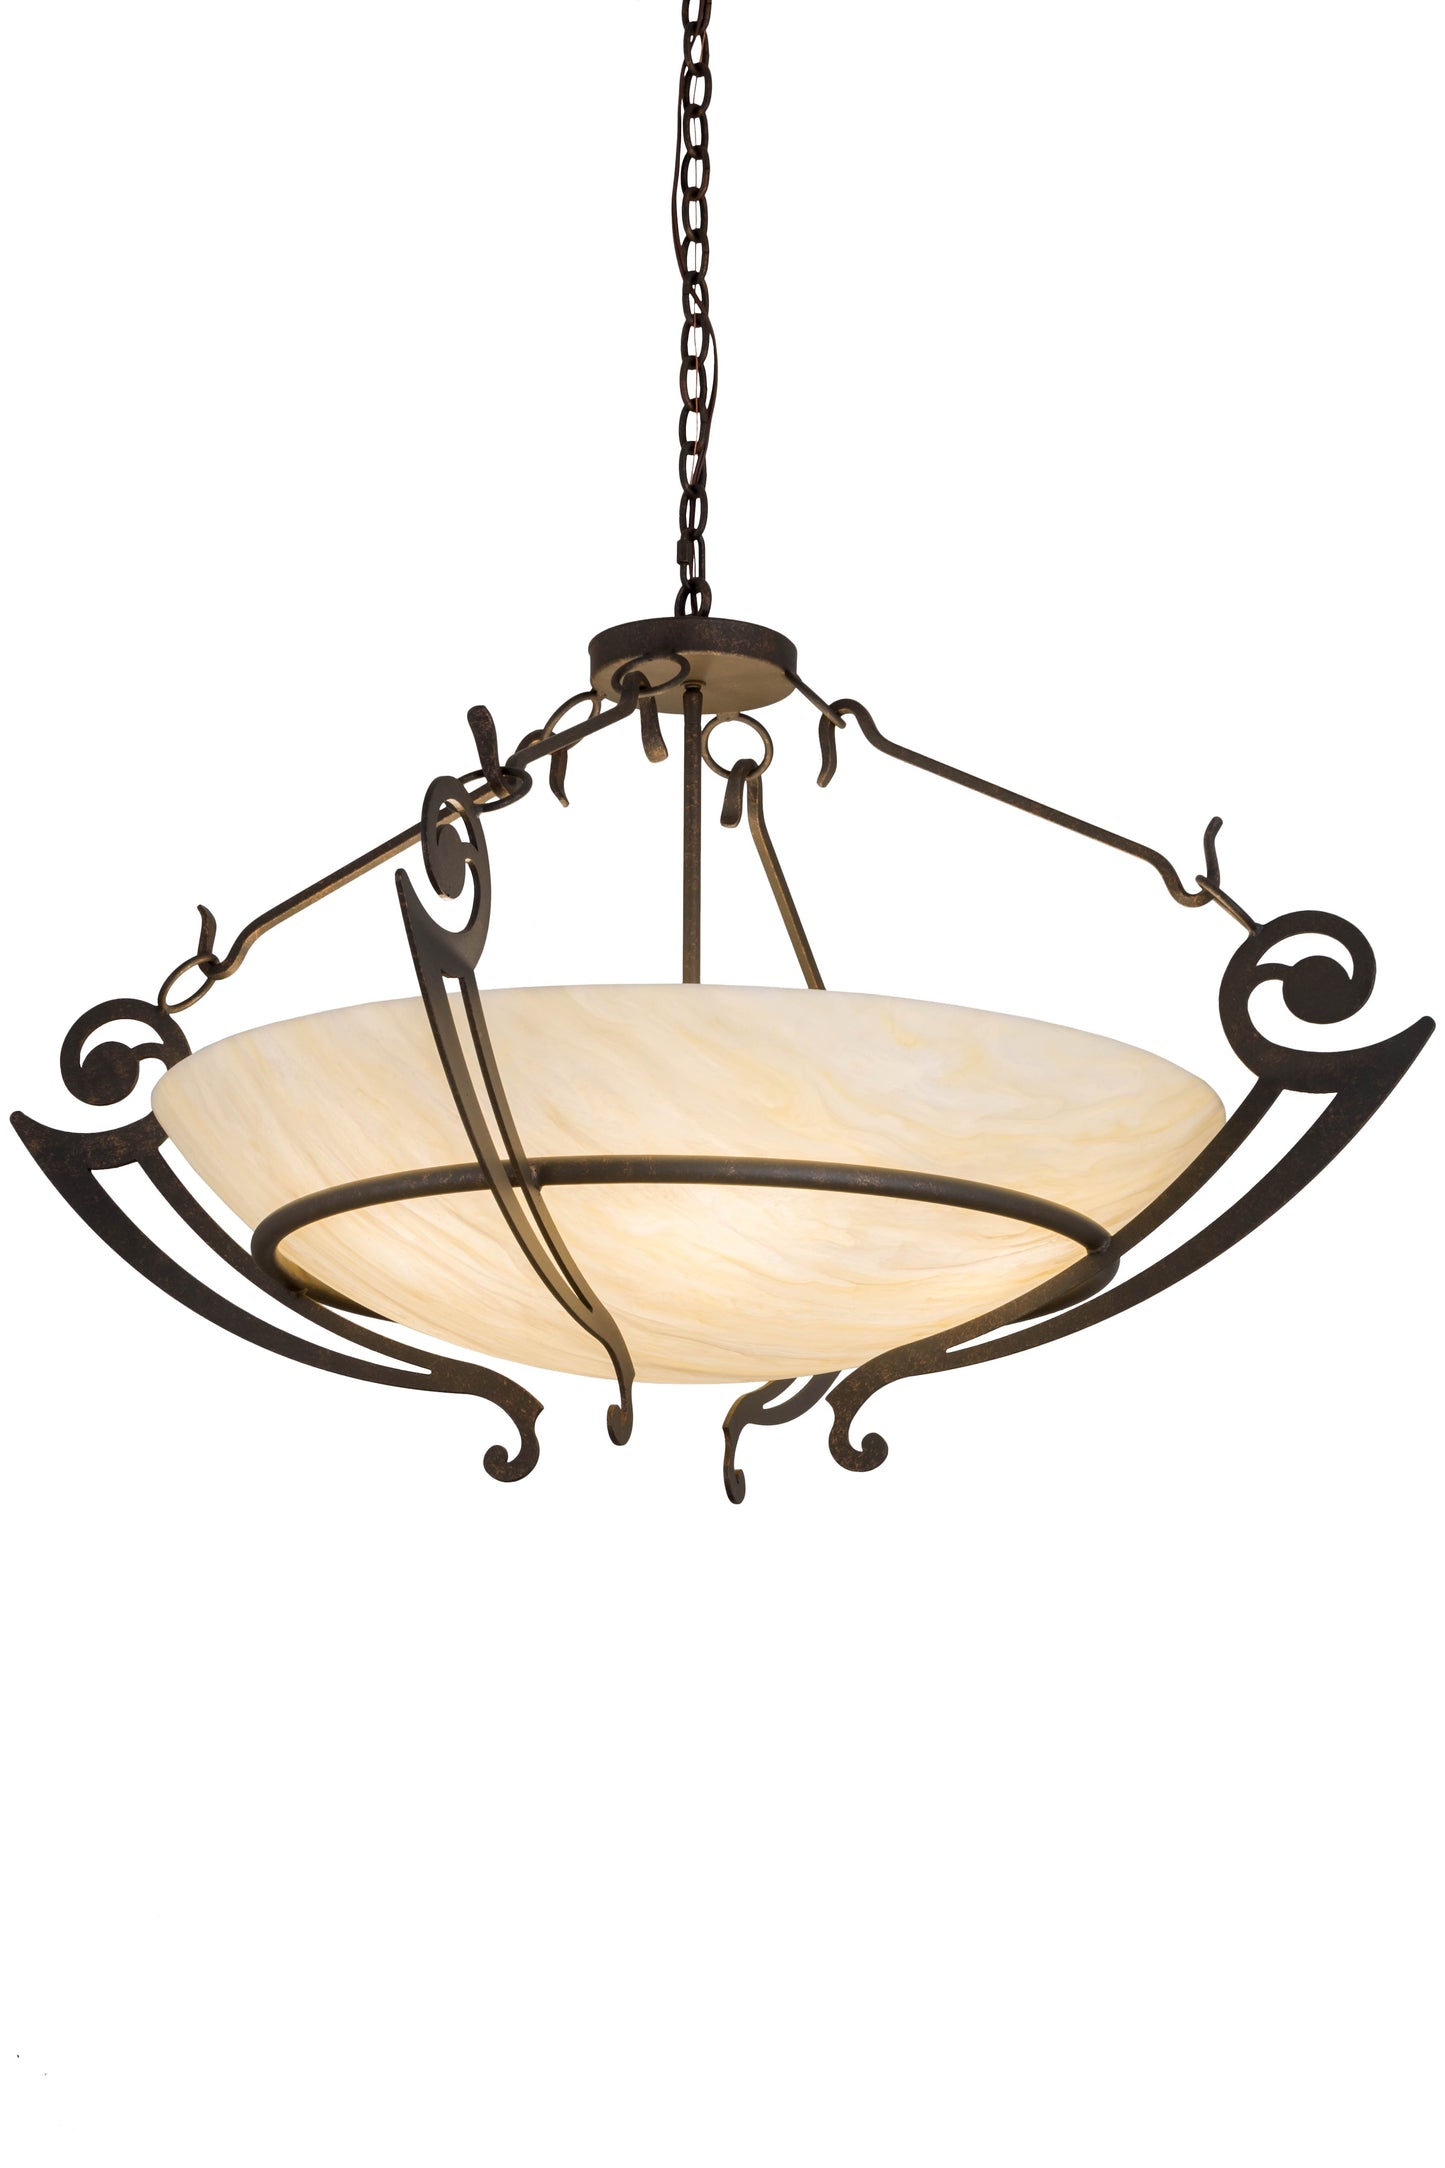 42" Ceres Inverted Pendant by 2nd Ave Lighting